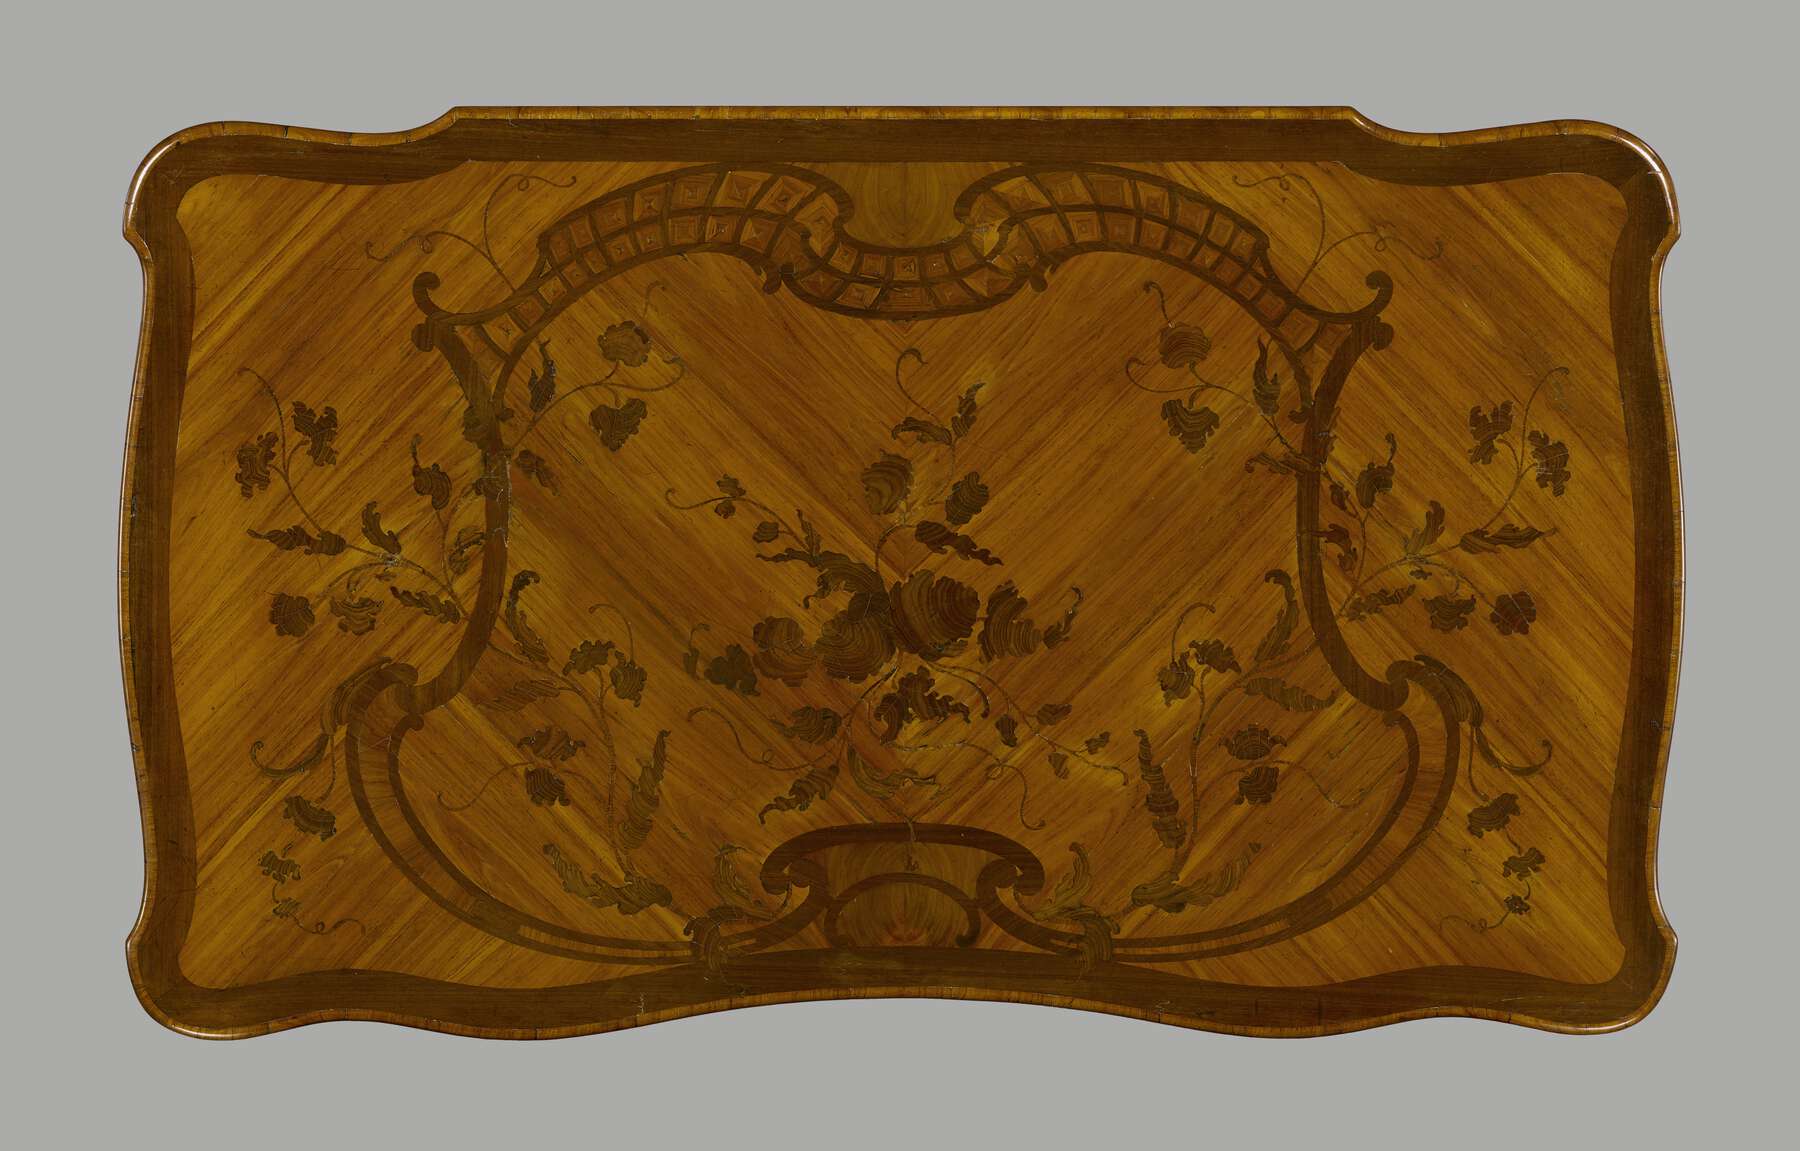 the table’s surface is decorated with wooden inlay arranged to highlight the grain background and a large marquetry in the middle of the table made of scrolls and floral designs